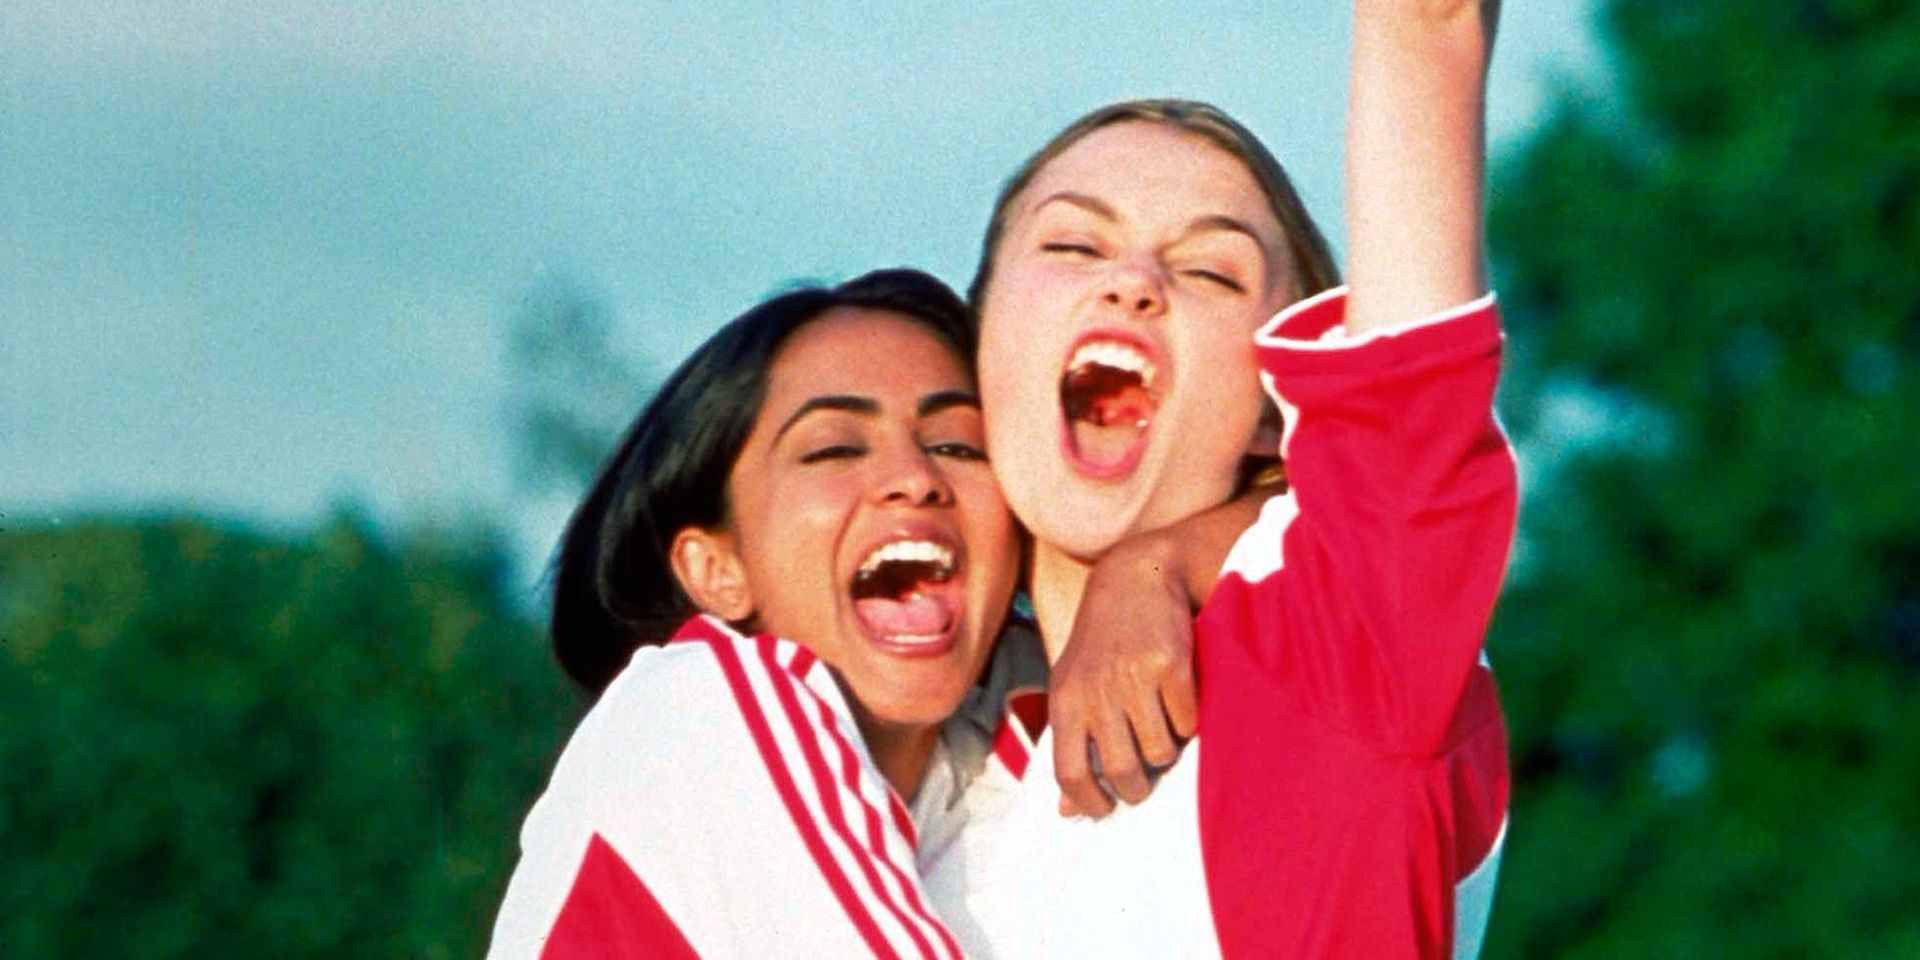 Jess and Juliette in Bend it Like Beckham, hugging and celebrating